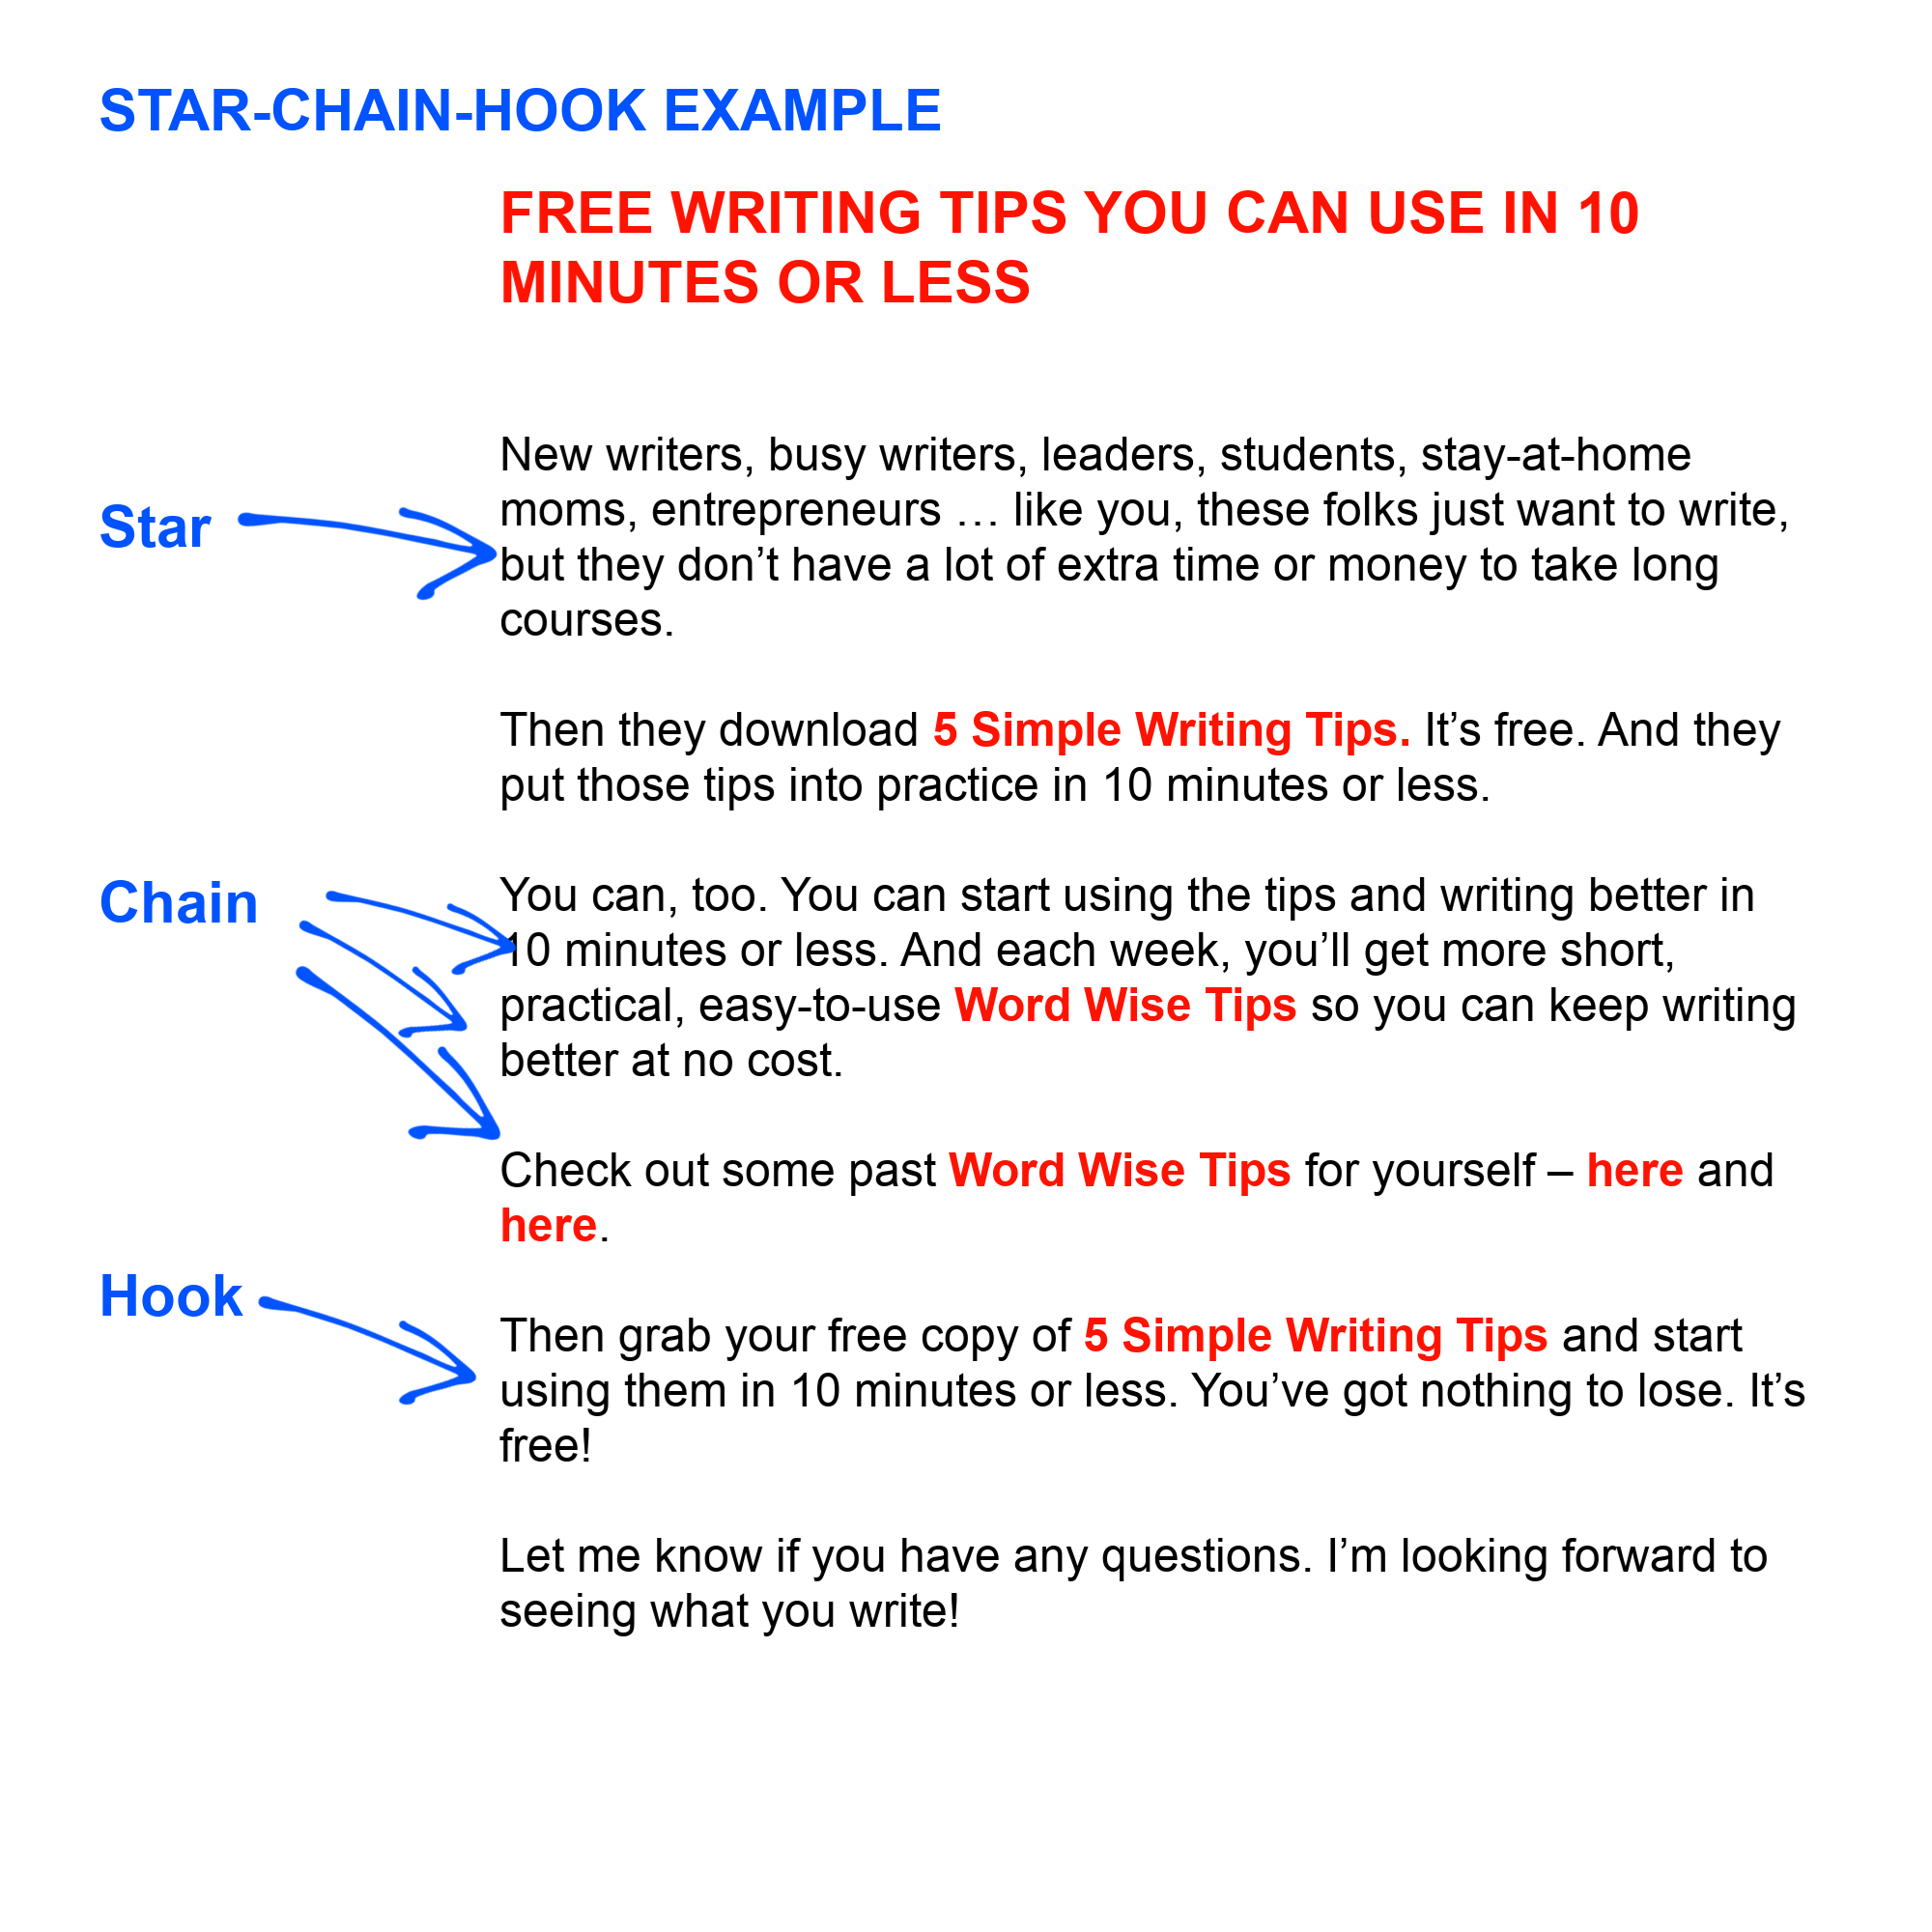 Star-Chain-Hook: a Simple (and Persuasive) Content Writing Formula